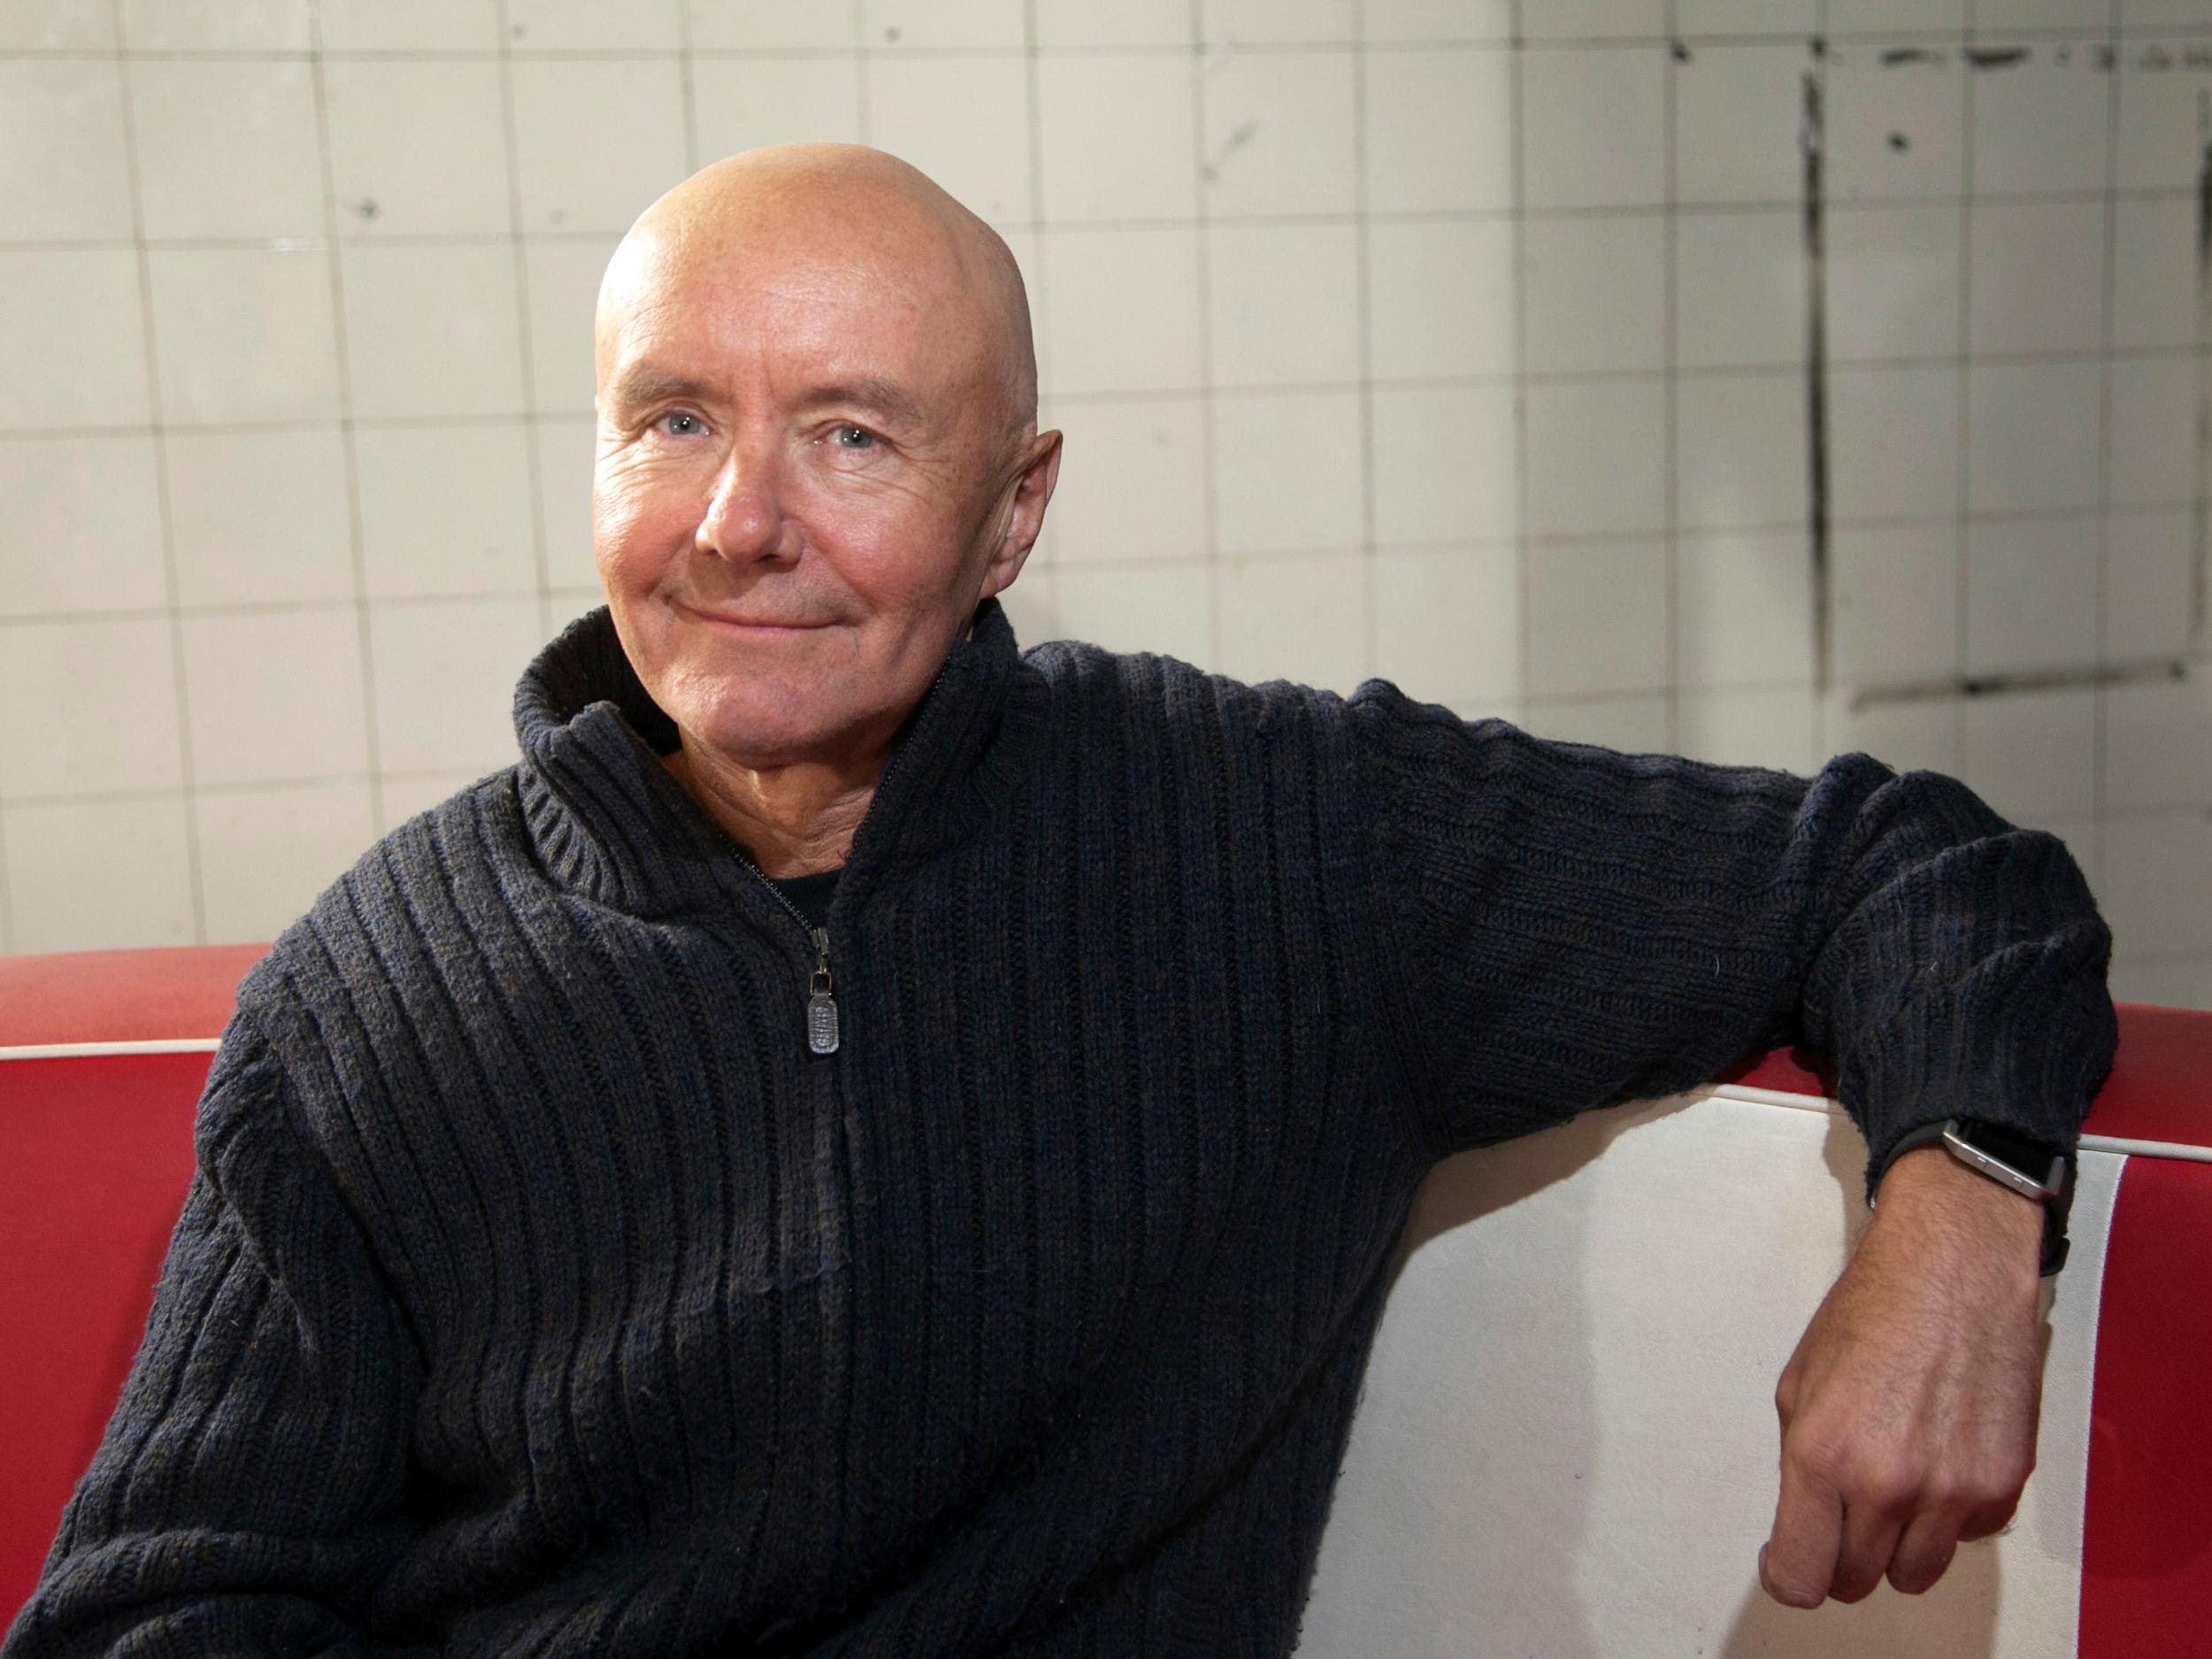 Irvine Welsh on staying relevant: 'Writers are in a strange position: it’s like trying to nail jelly to the wall, it's shifting sand all the time'